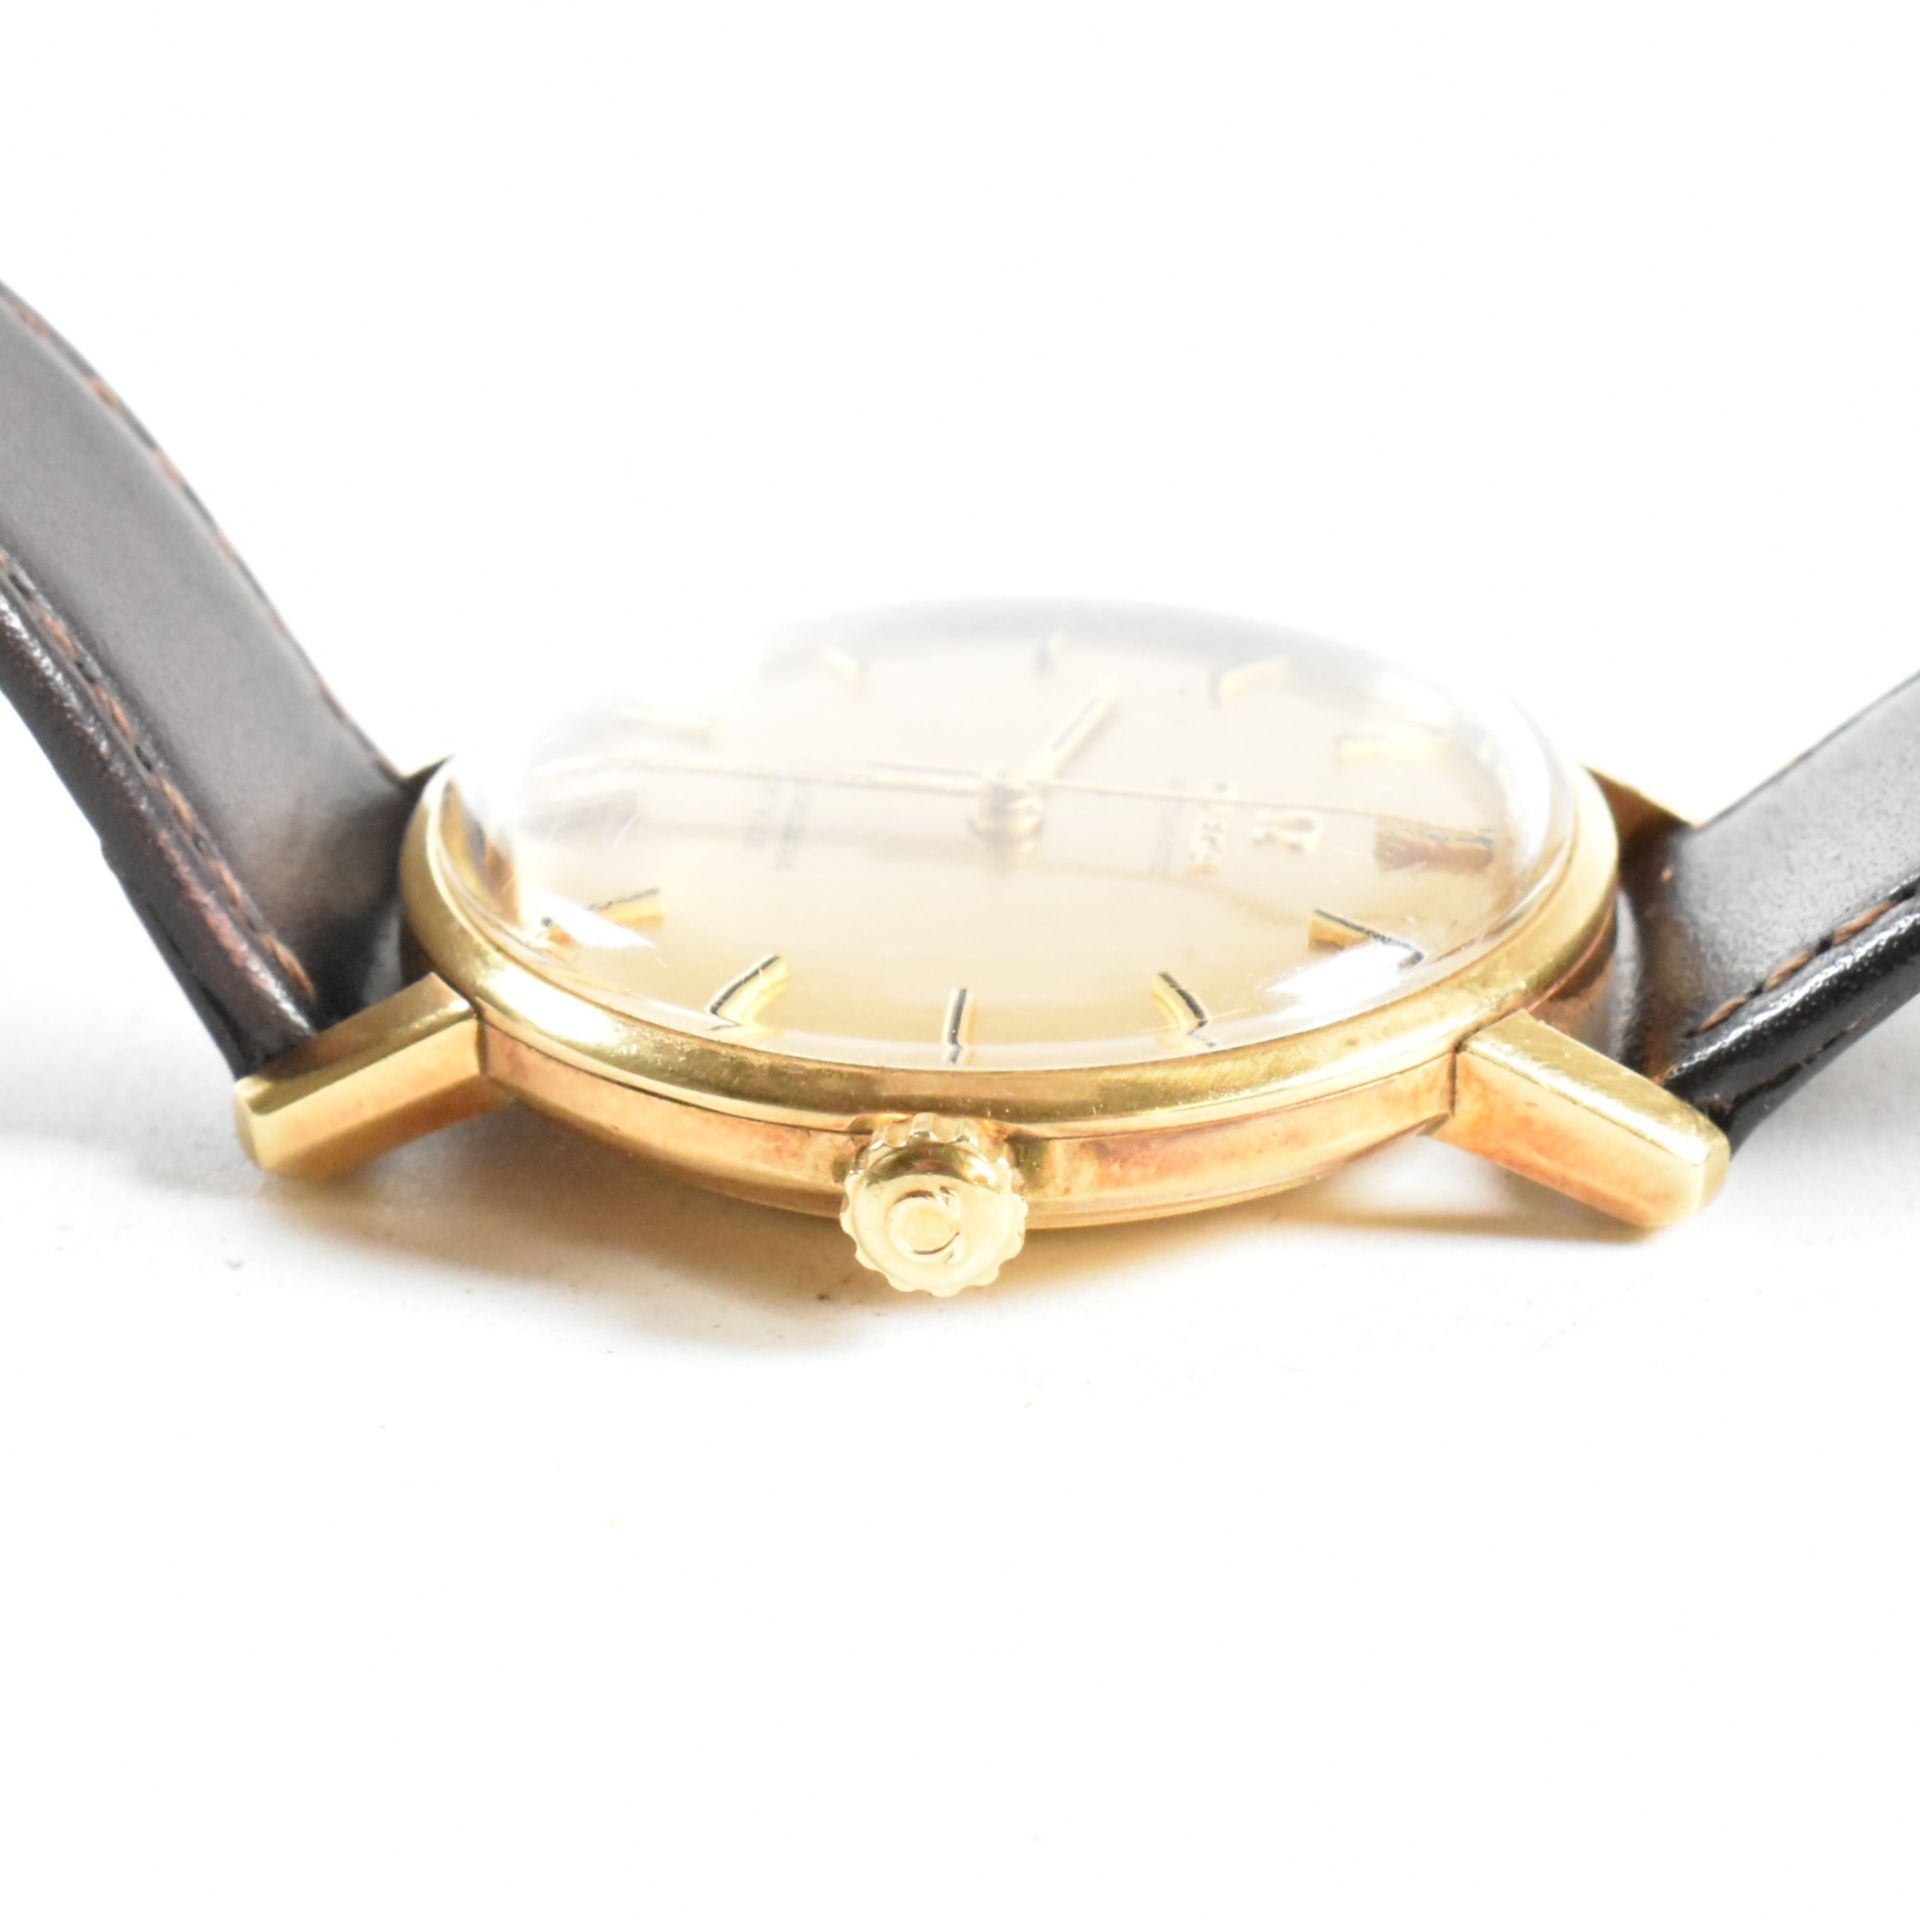 1960S 18CT GOLD OMEGA AUTOMATIC SEAMASTER DE VILLE WRISTWATCH - Image 6 of 6